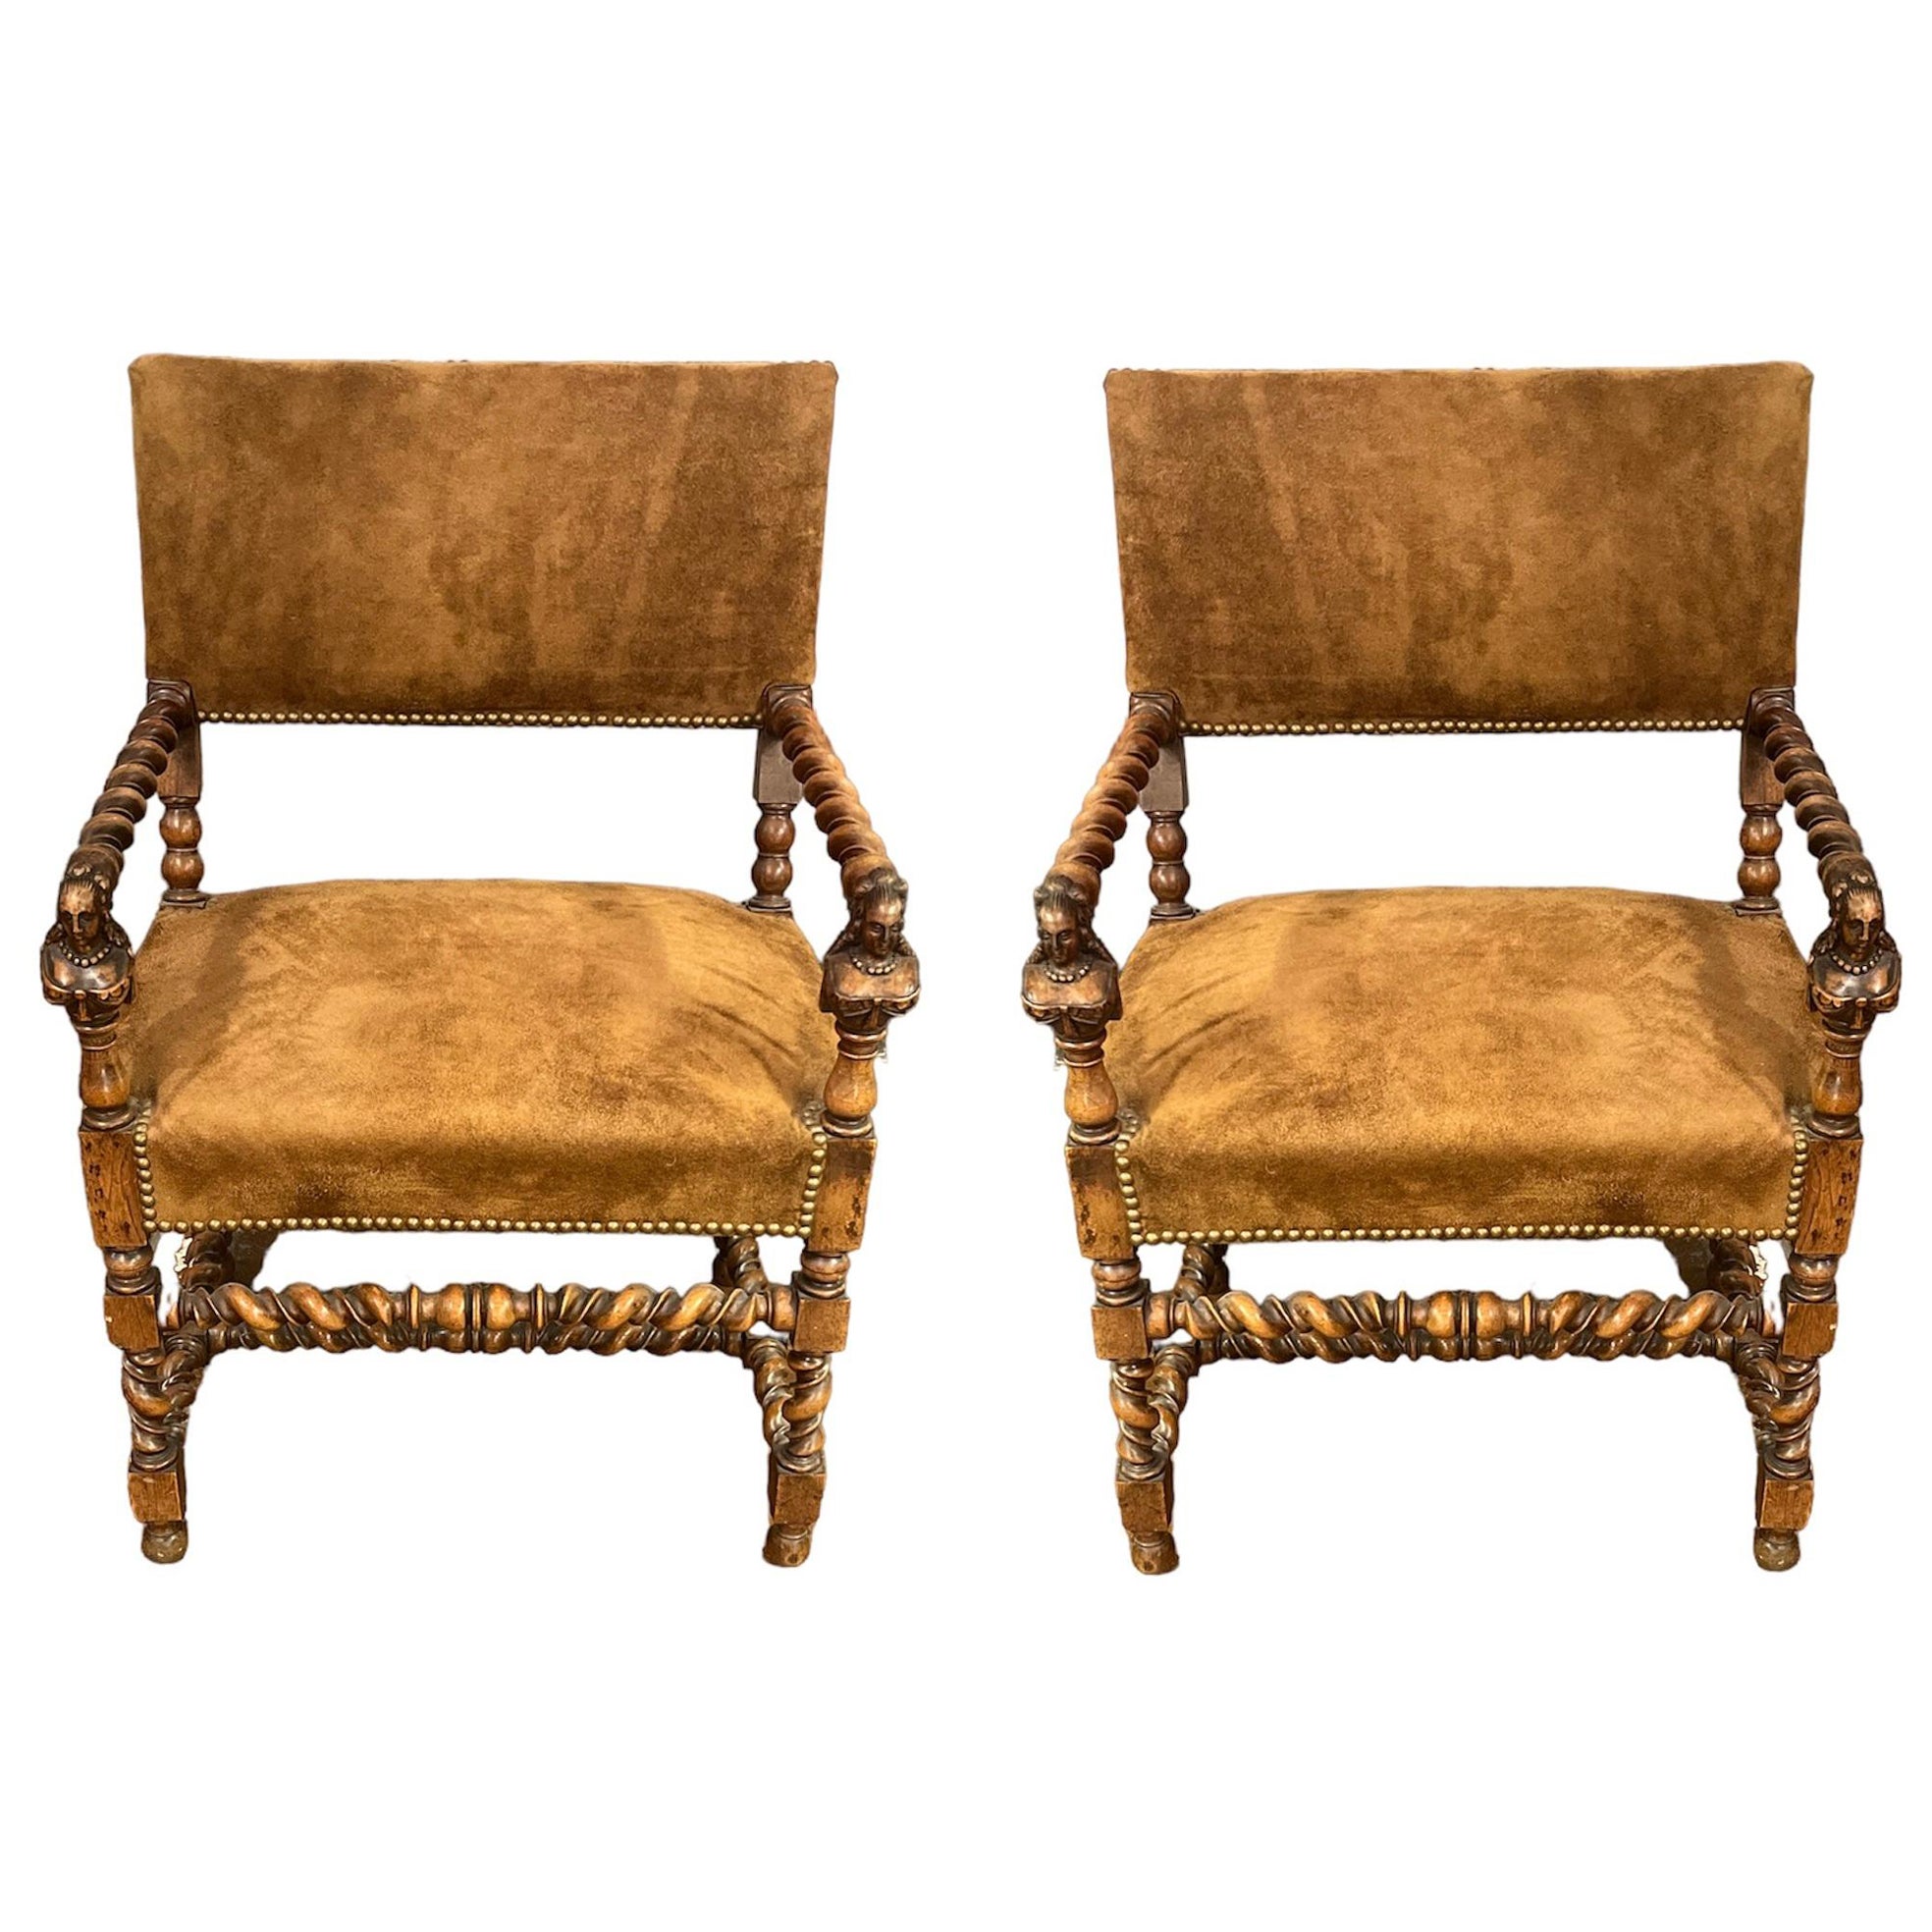 Pair of Early 19thc English Hand Carved Barley Twist And Suede Arm Chairs For Sale